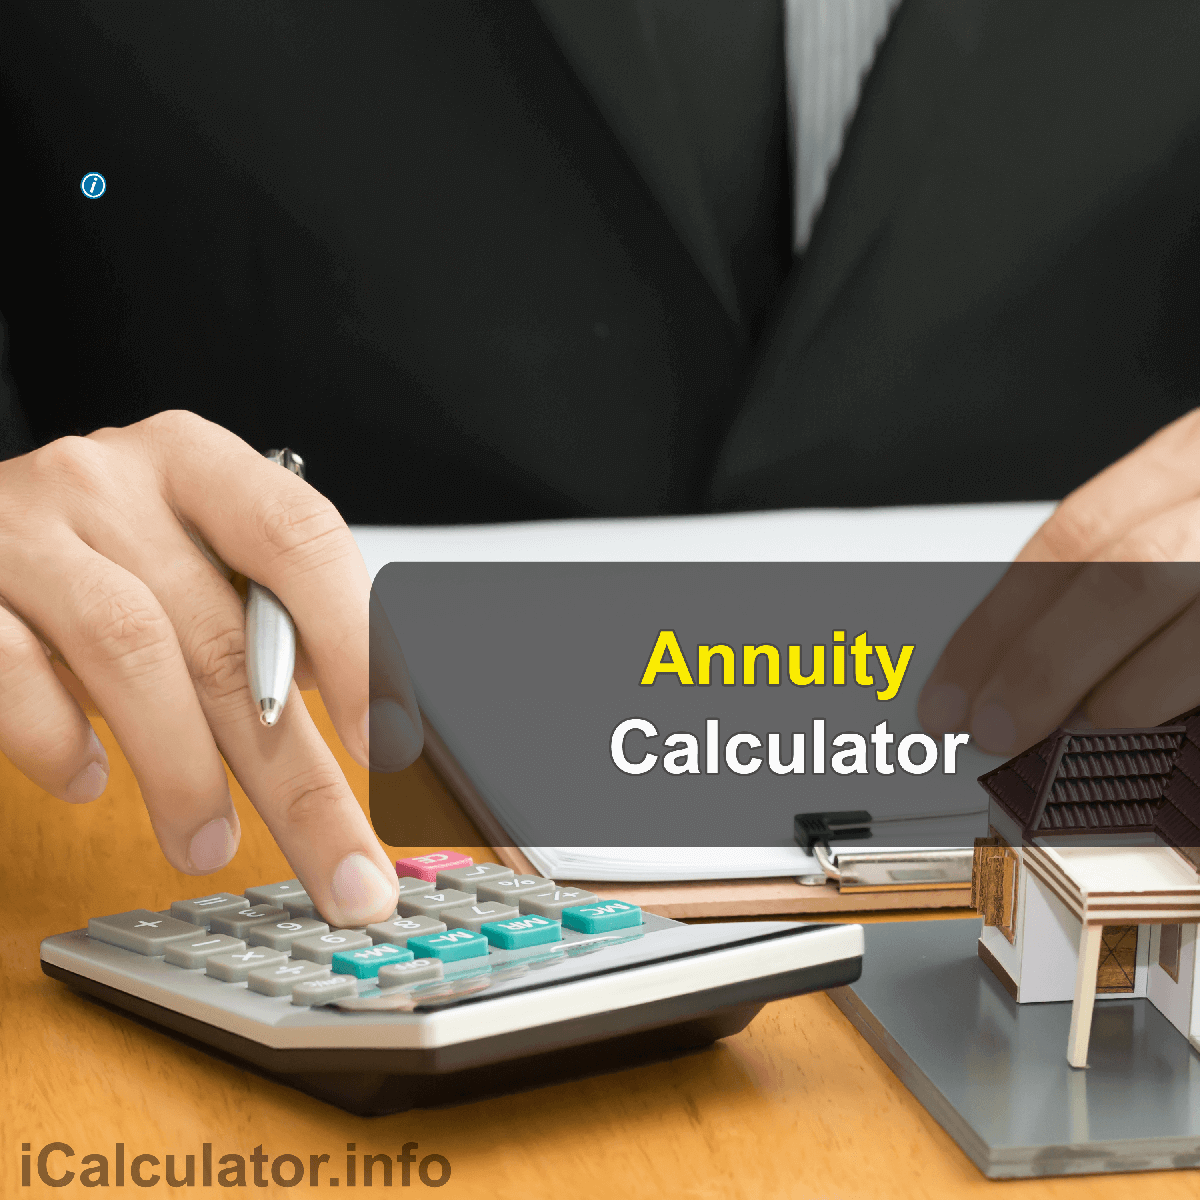 Annuity Calculator. This image provides details of how to calculate annuity using a good calculator and notepad. By using the annuity formula, the Annuity Calculator provides a true calculation of the return on investment of a lump sum with regular monthly contributions